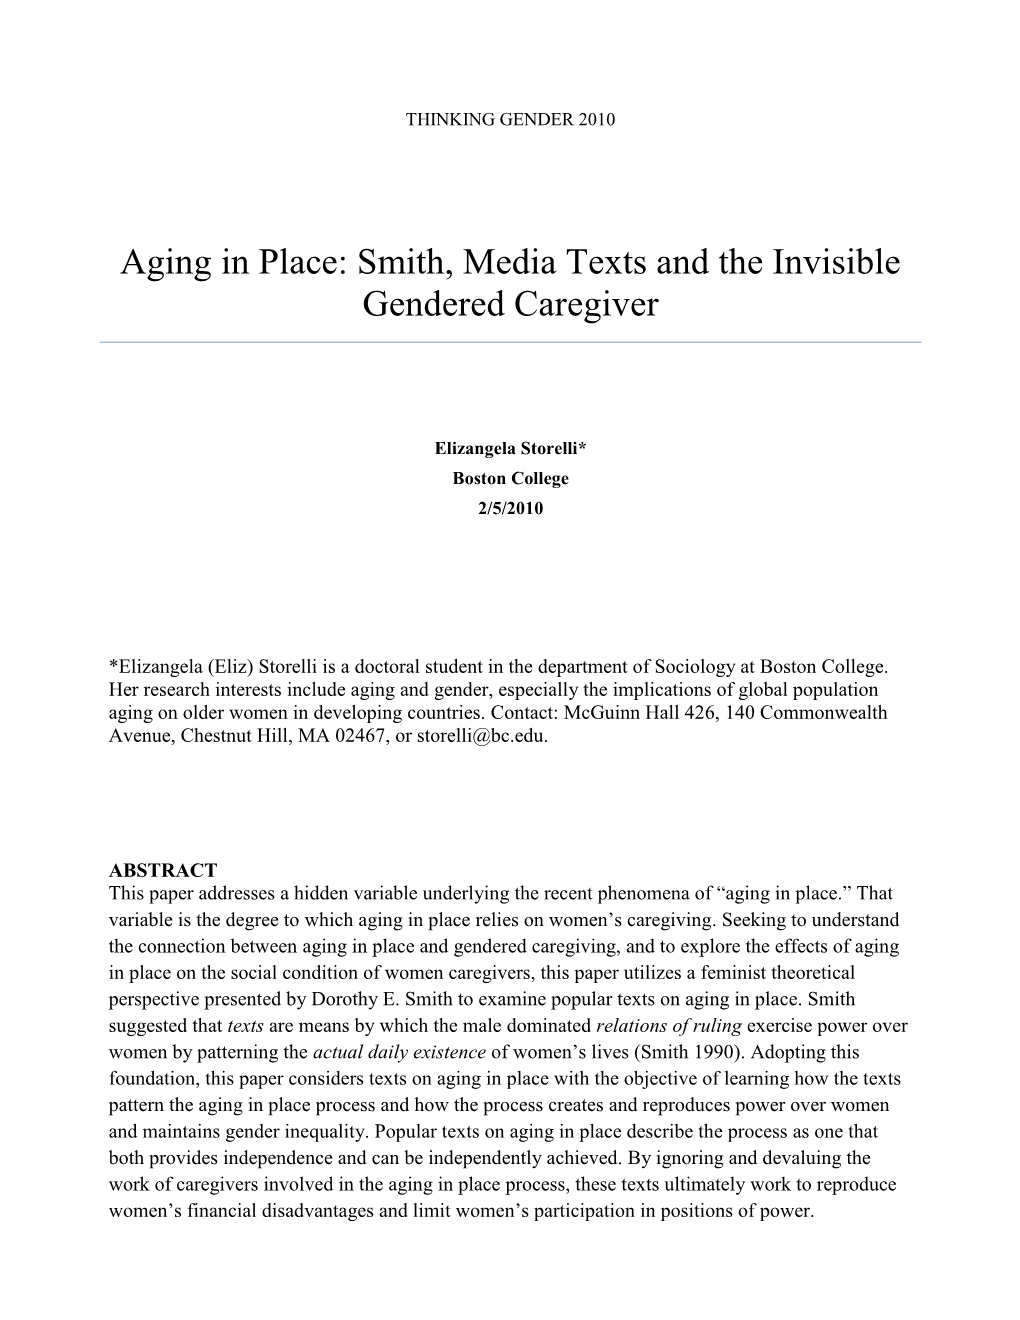 Aging in Place: Smith, Media Texts and the Invisible Gendered Caregiver